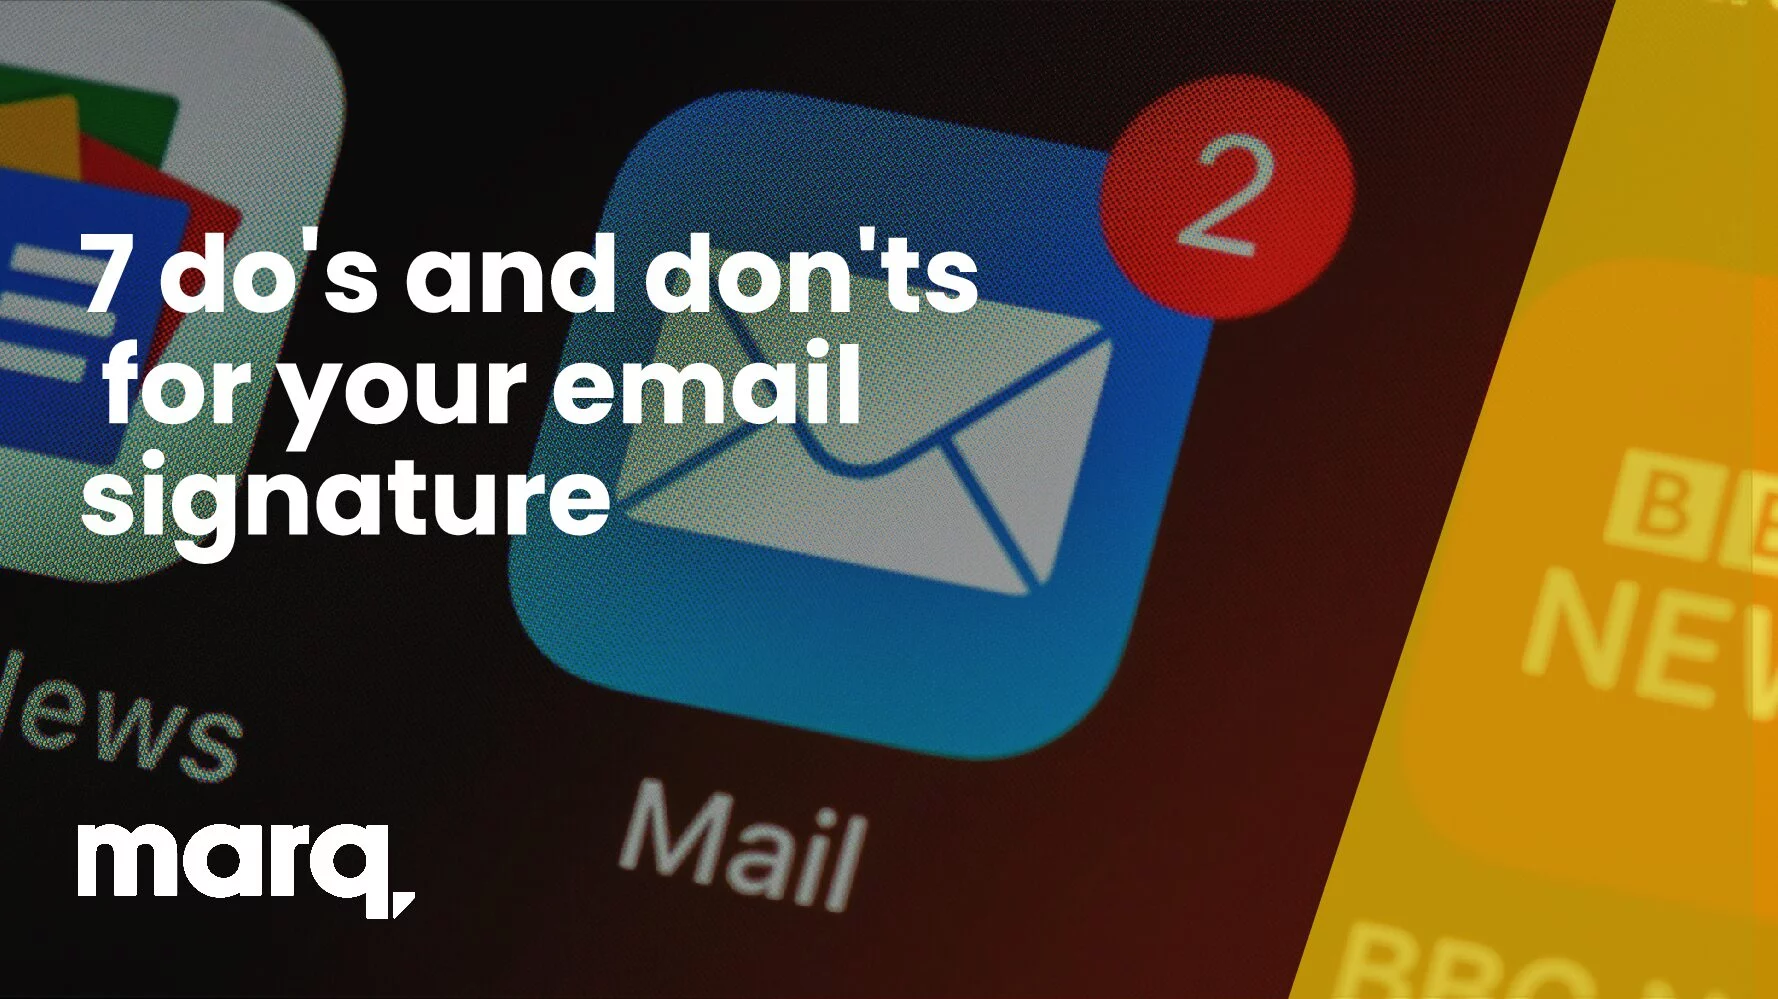 7 do’s and don’ts for your email signature